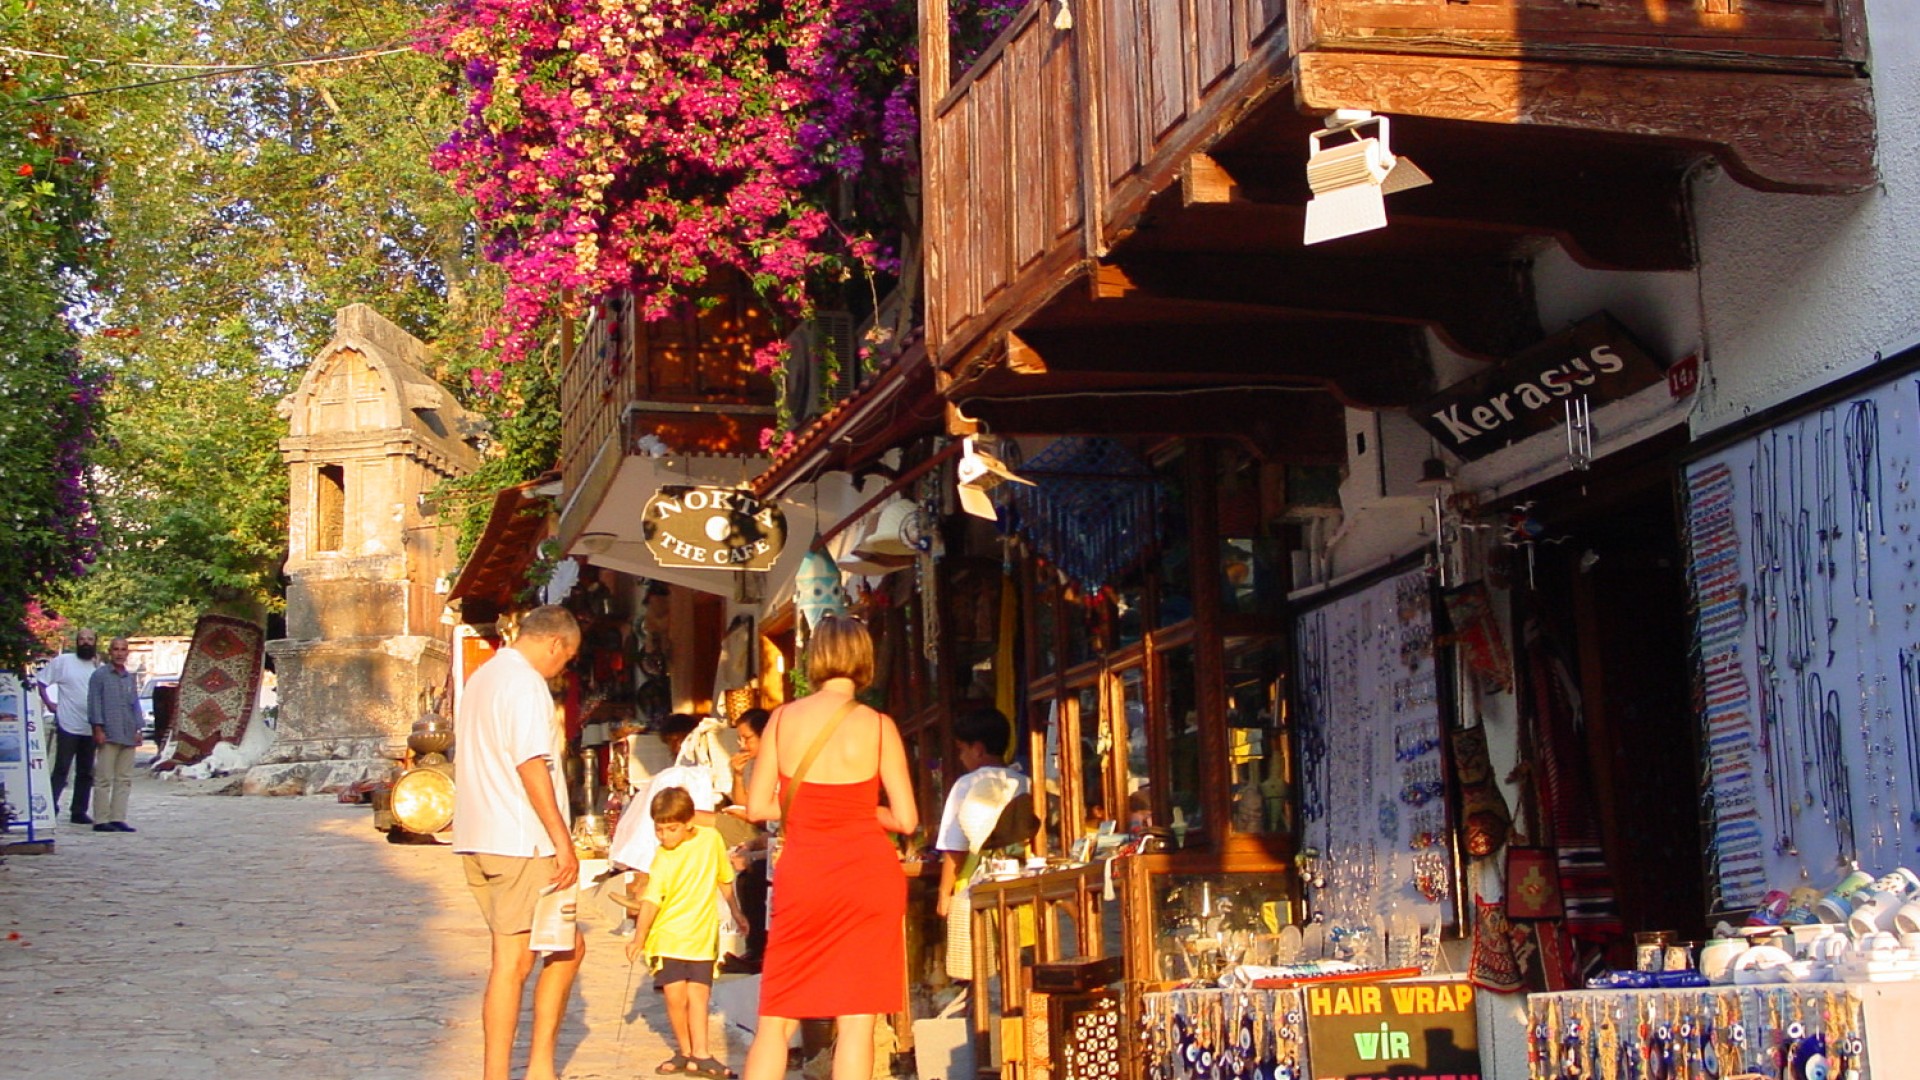 Parents with their child walking the cobblestone streets of Turkey next to a local art mercantile around sunset